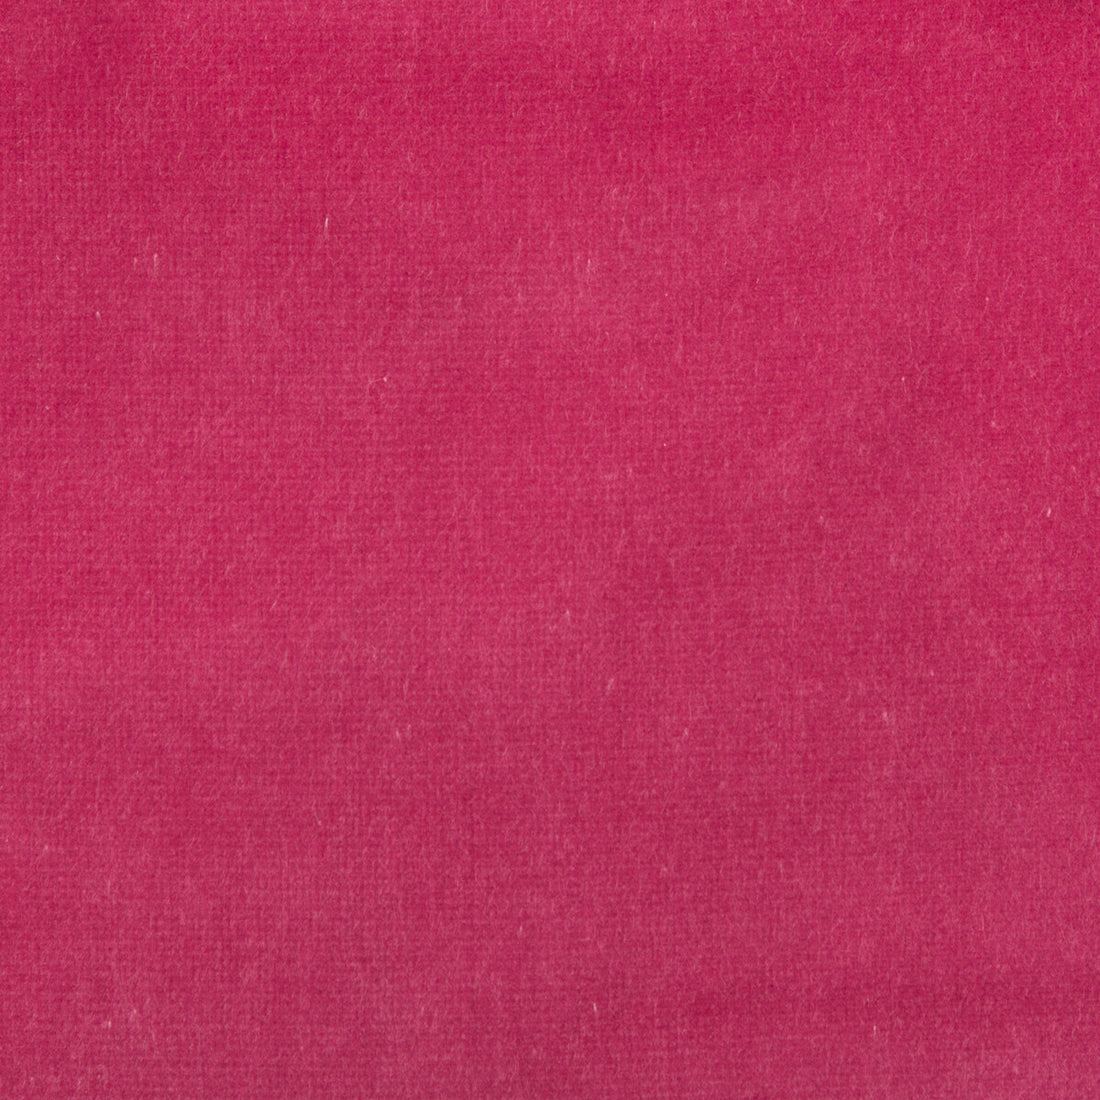 Velvet Treat fabric in hot pink color - pattern 33062.97.0 - by Kravet Couture in the Modern Colors III collection